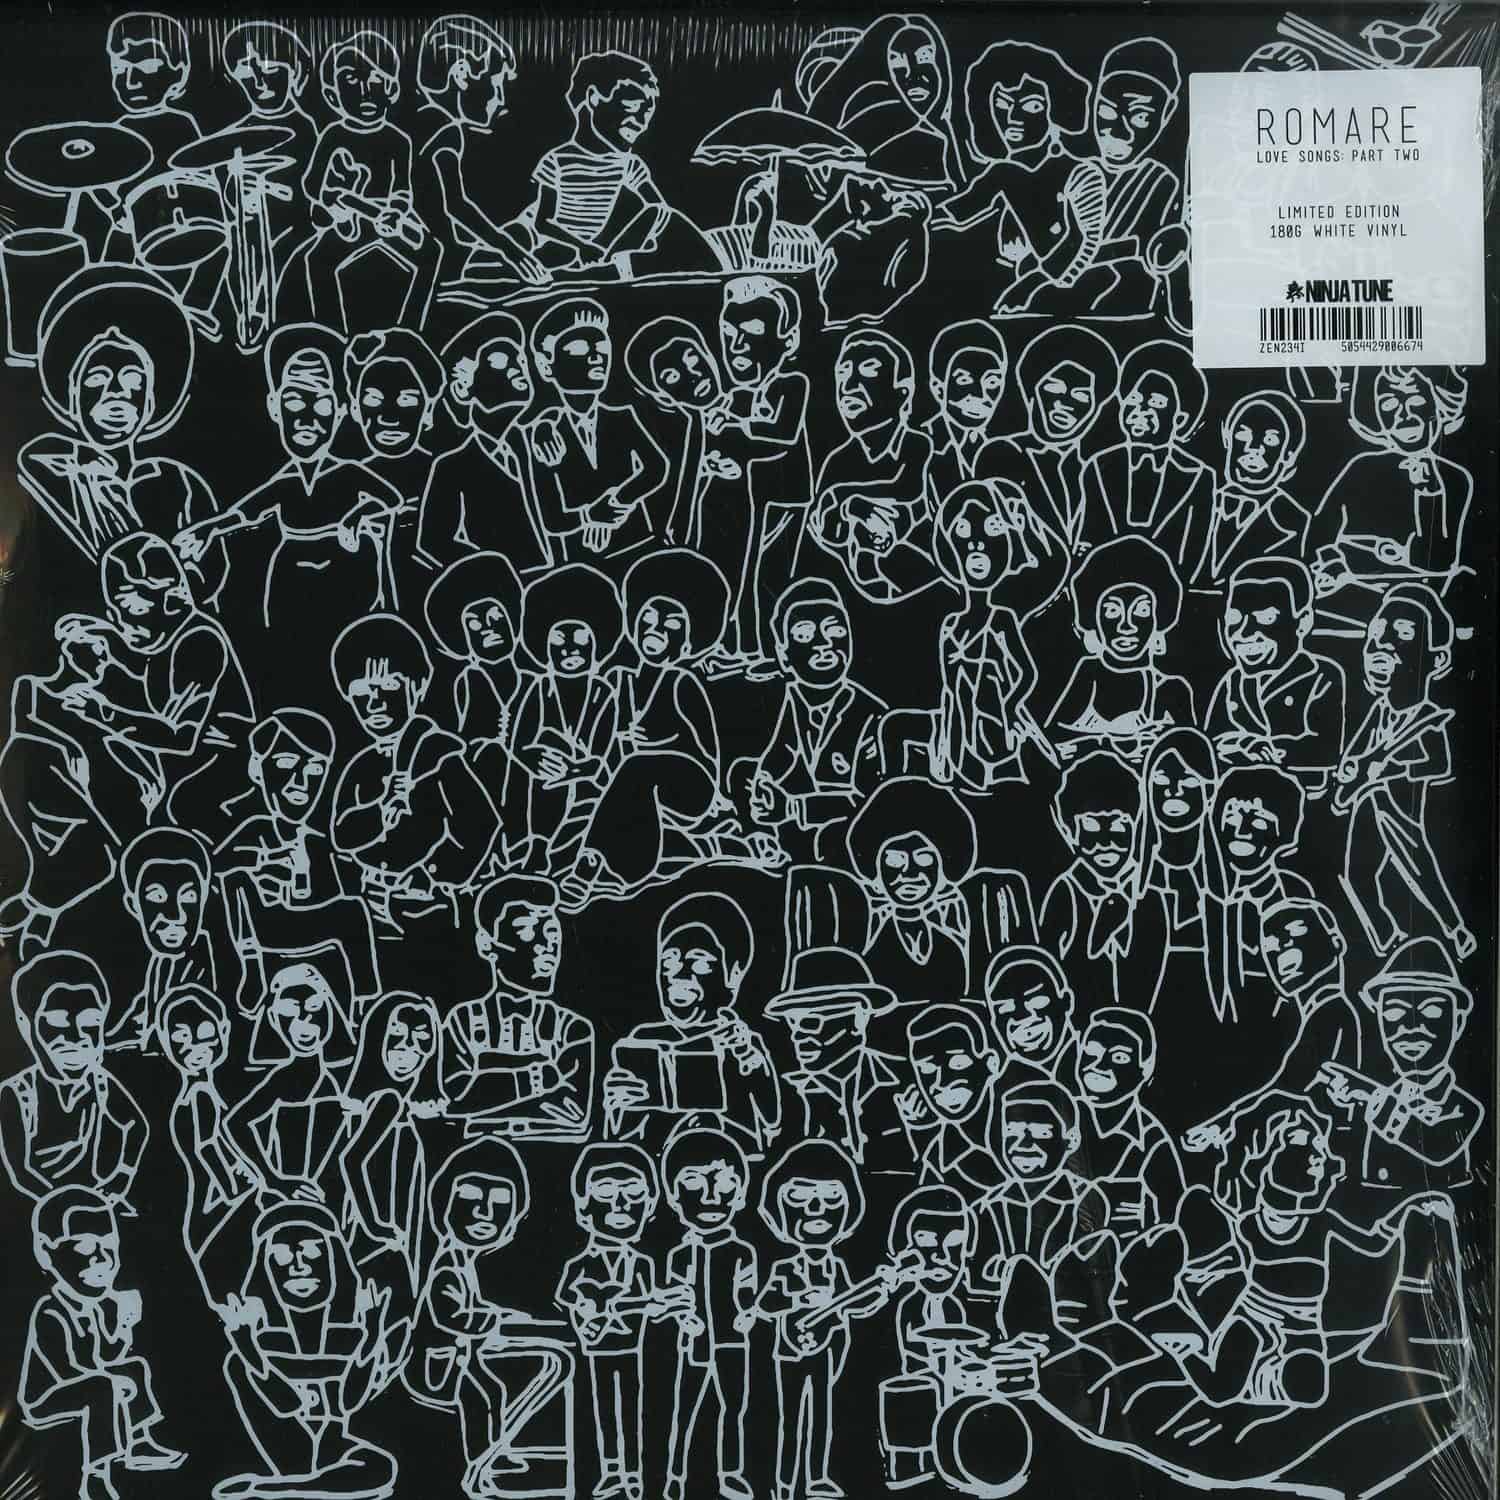 Romare - LOVE SONGS: PART TWO 